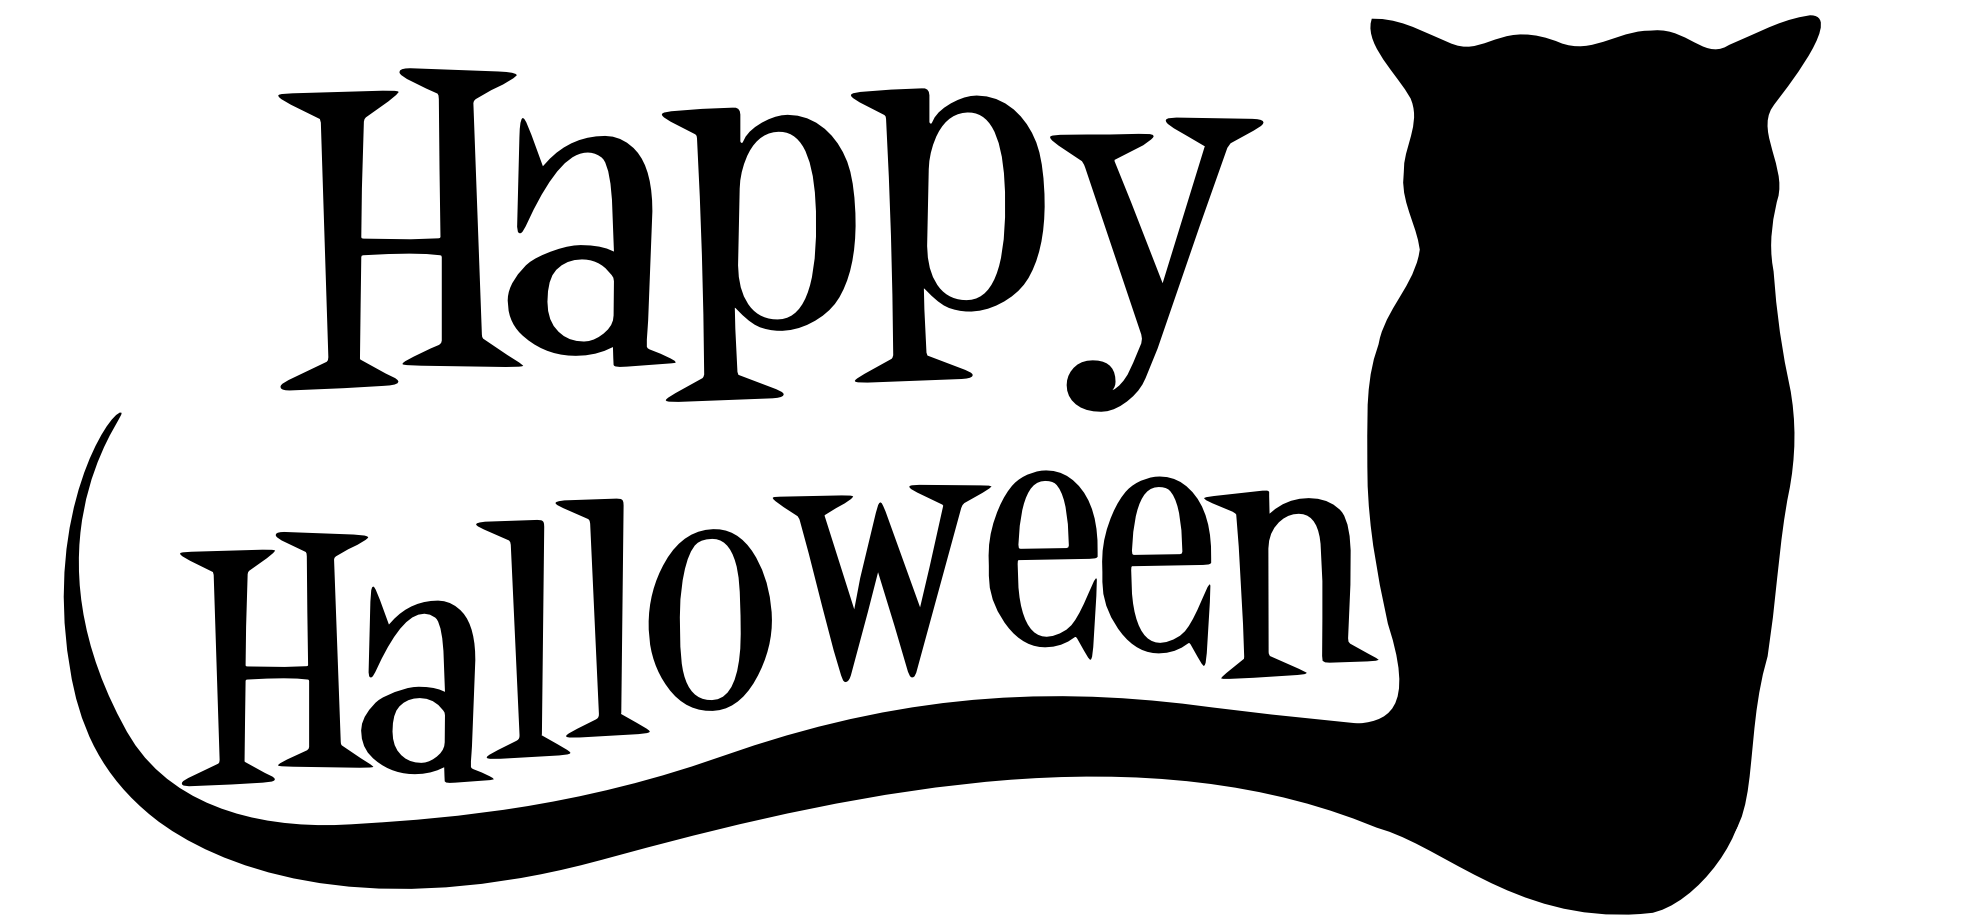 Halloween Black and White Logo - Black and white happy halloween jpg royalty free stock - RR collections